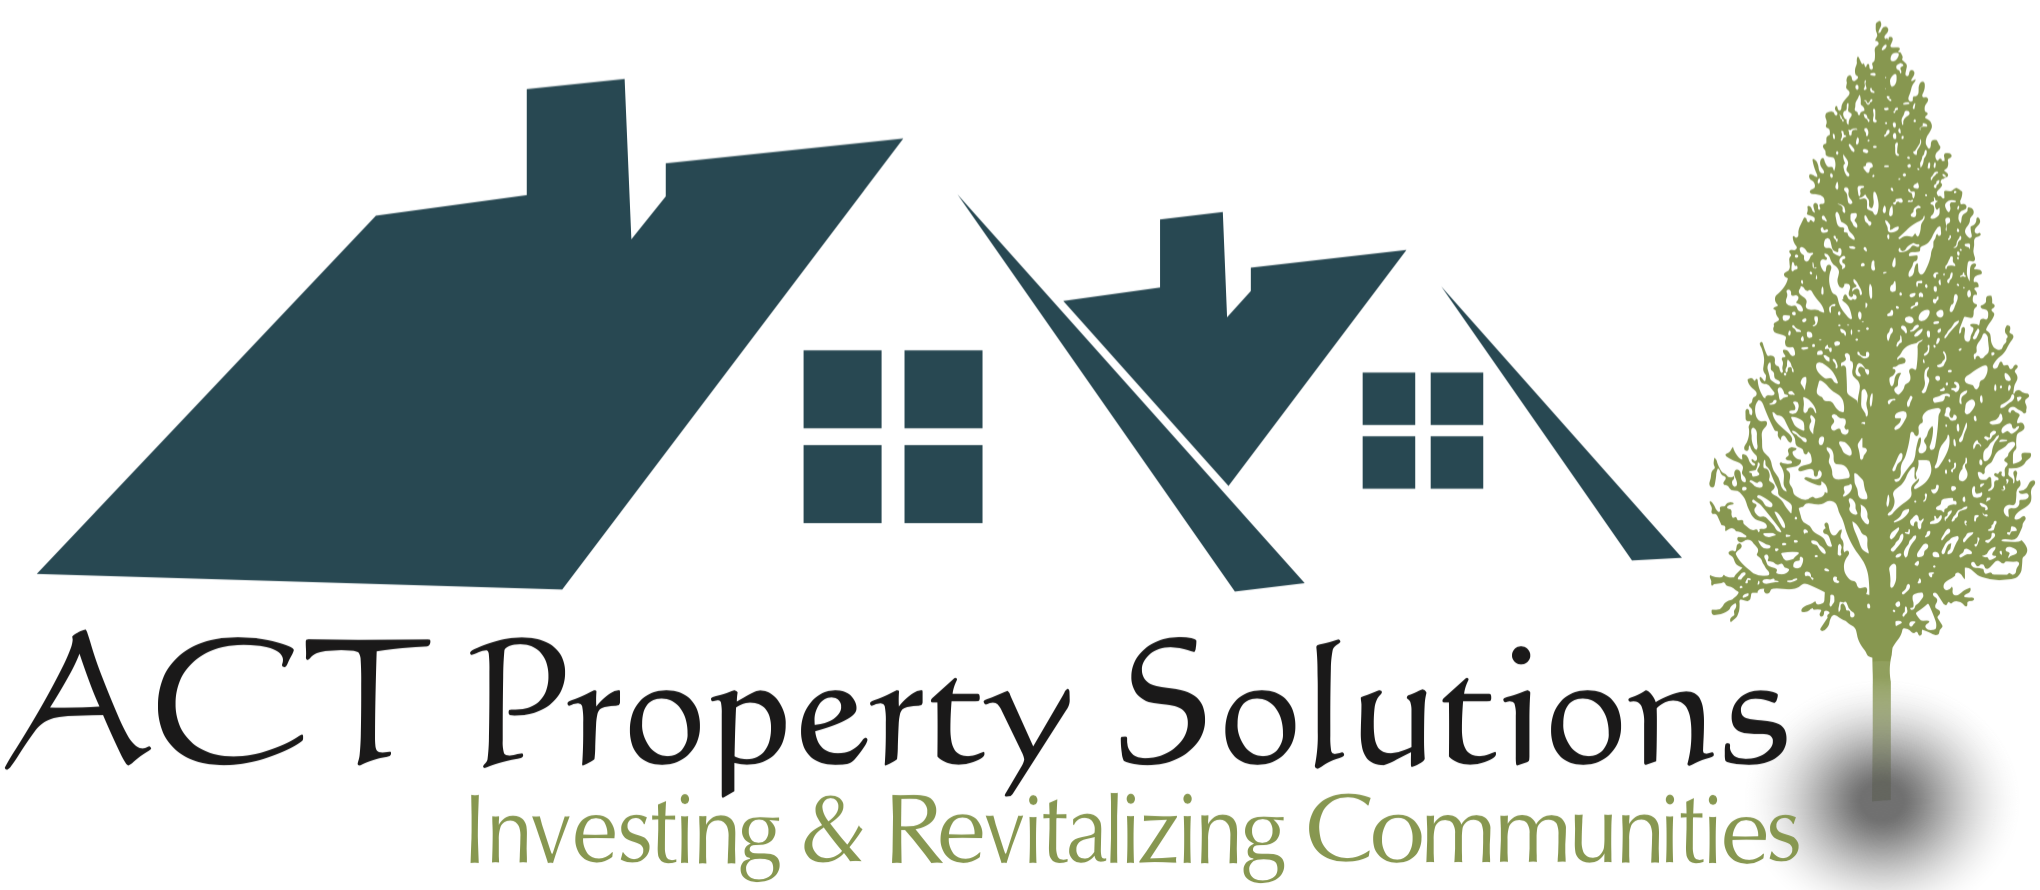 ACT Property Solutions